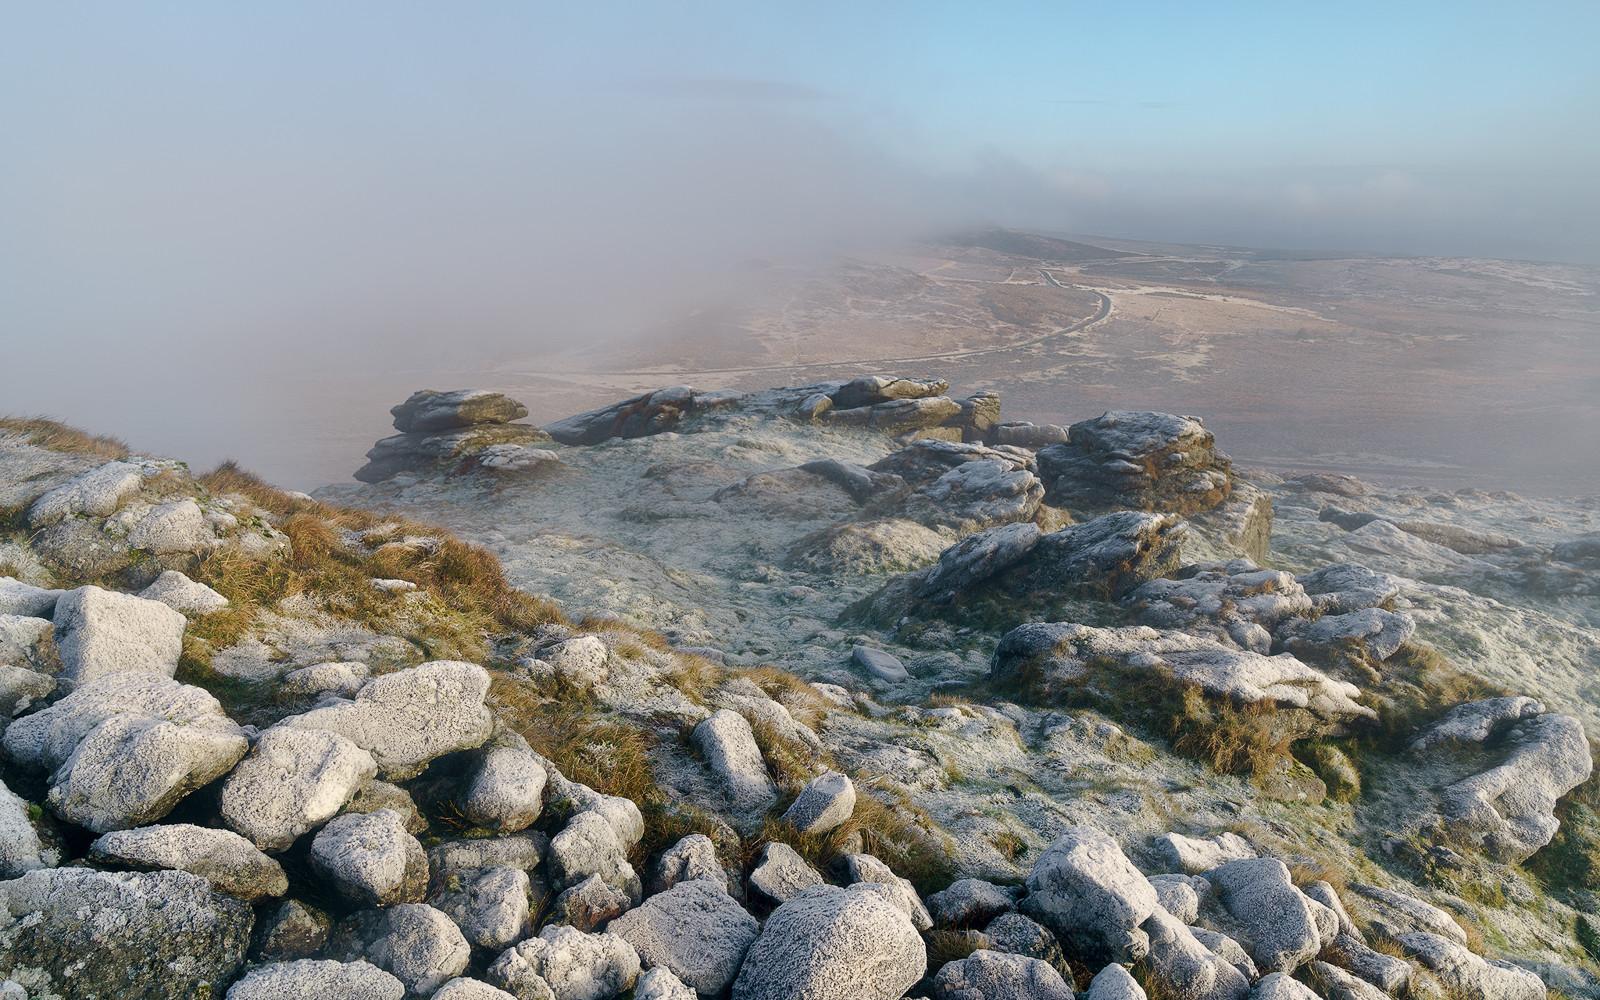 Image of Rippon Tor by Richard Fox